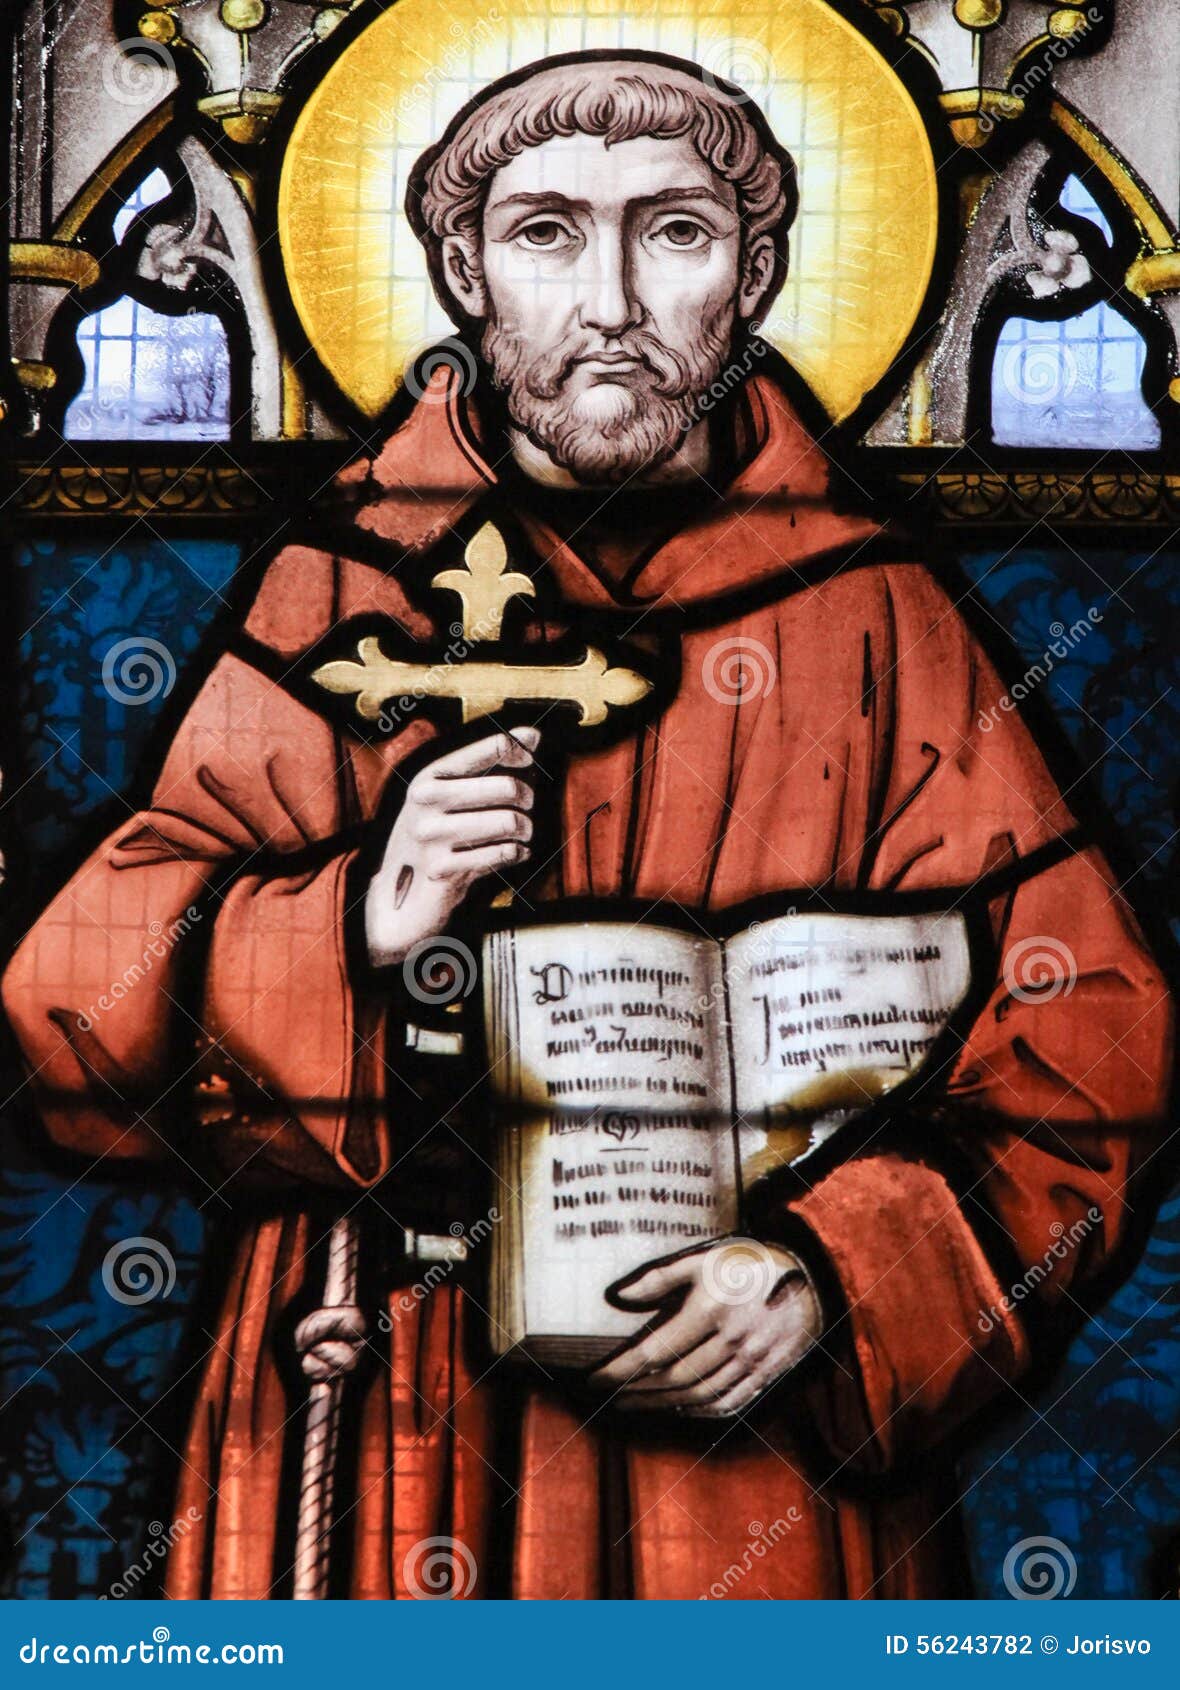 stained glass - saint francis of assisi